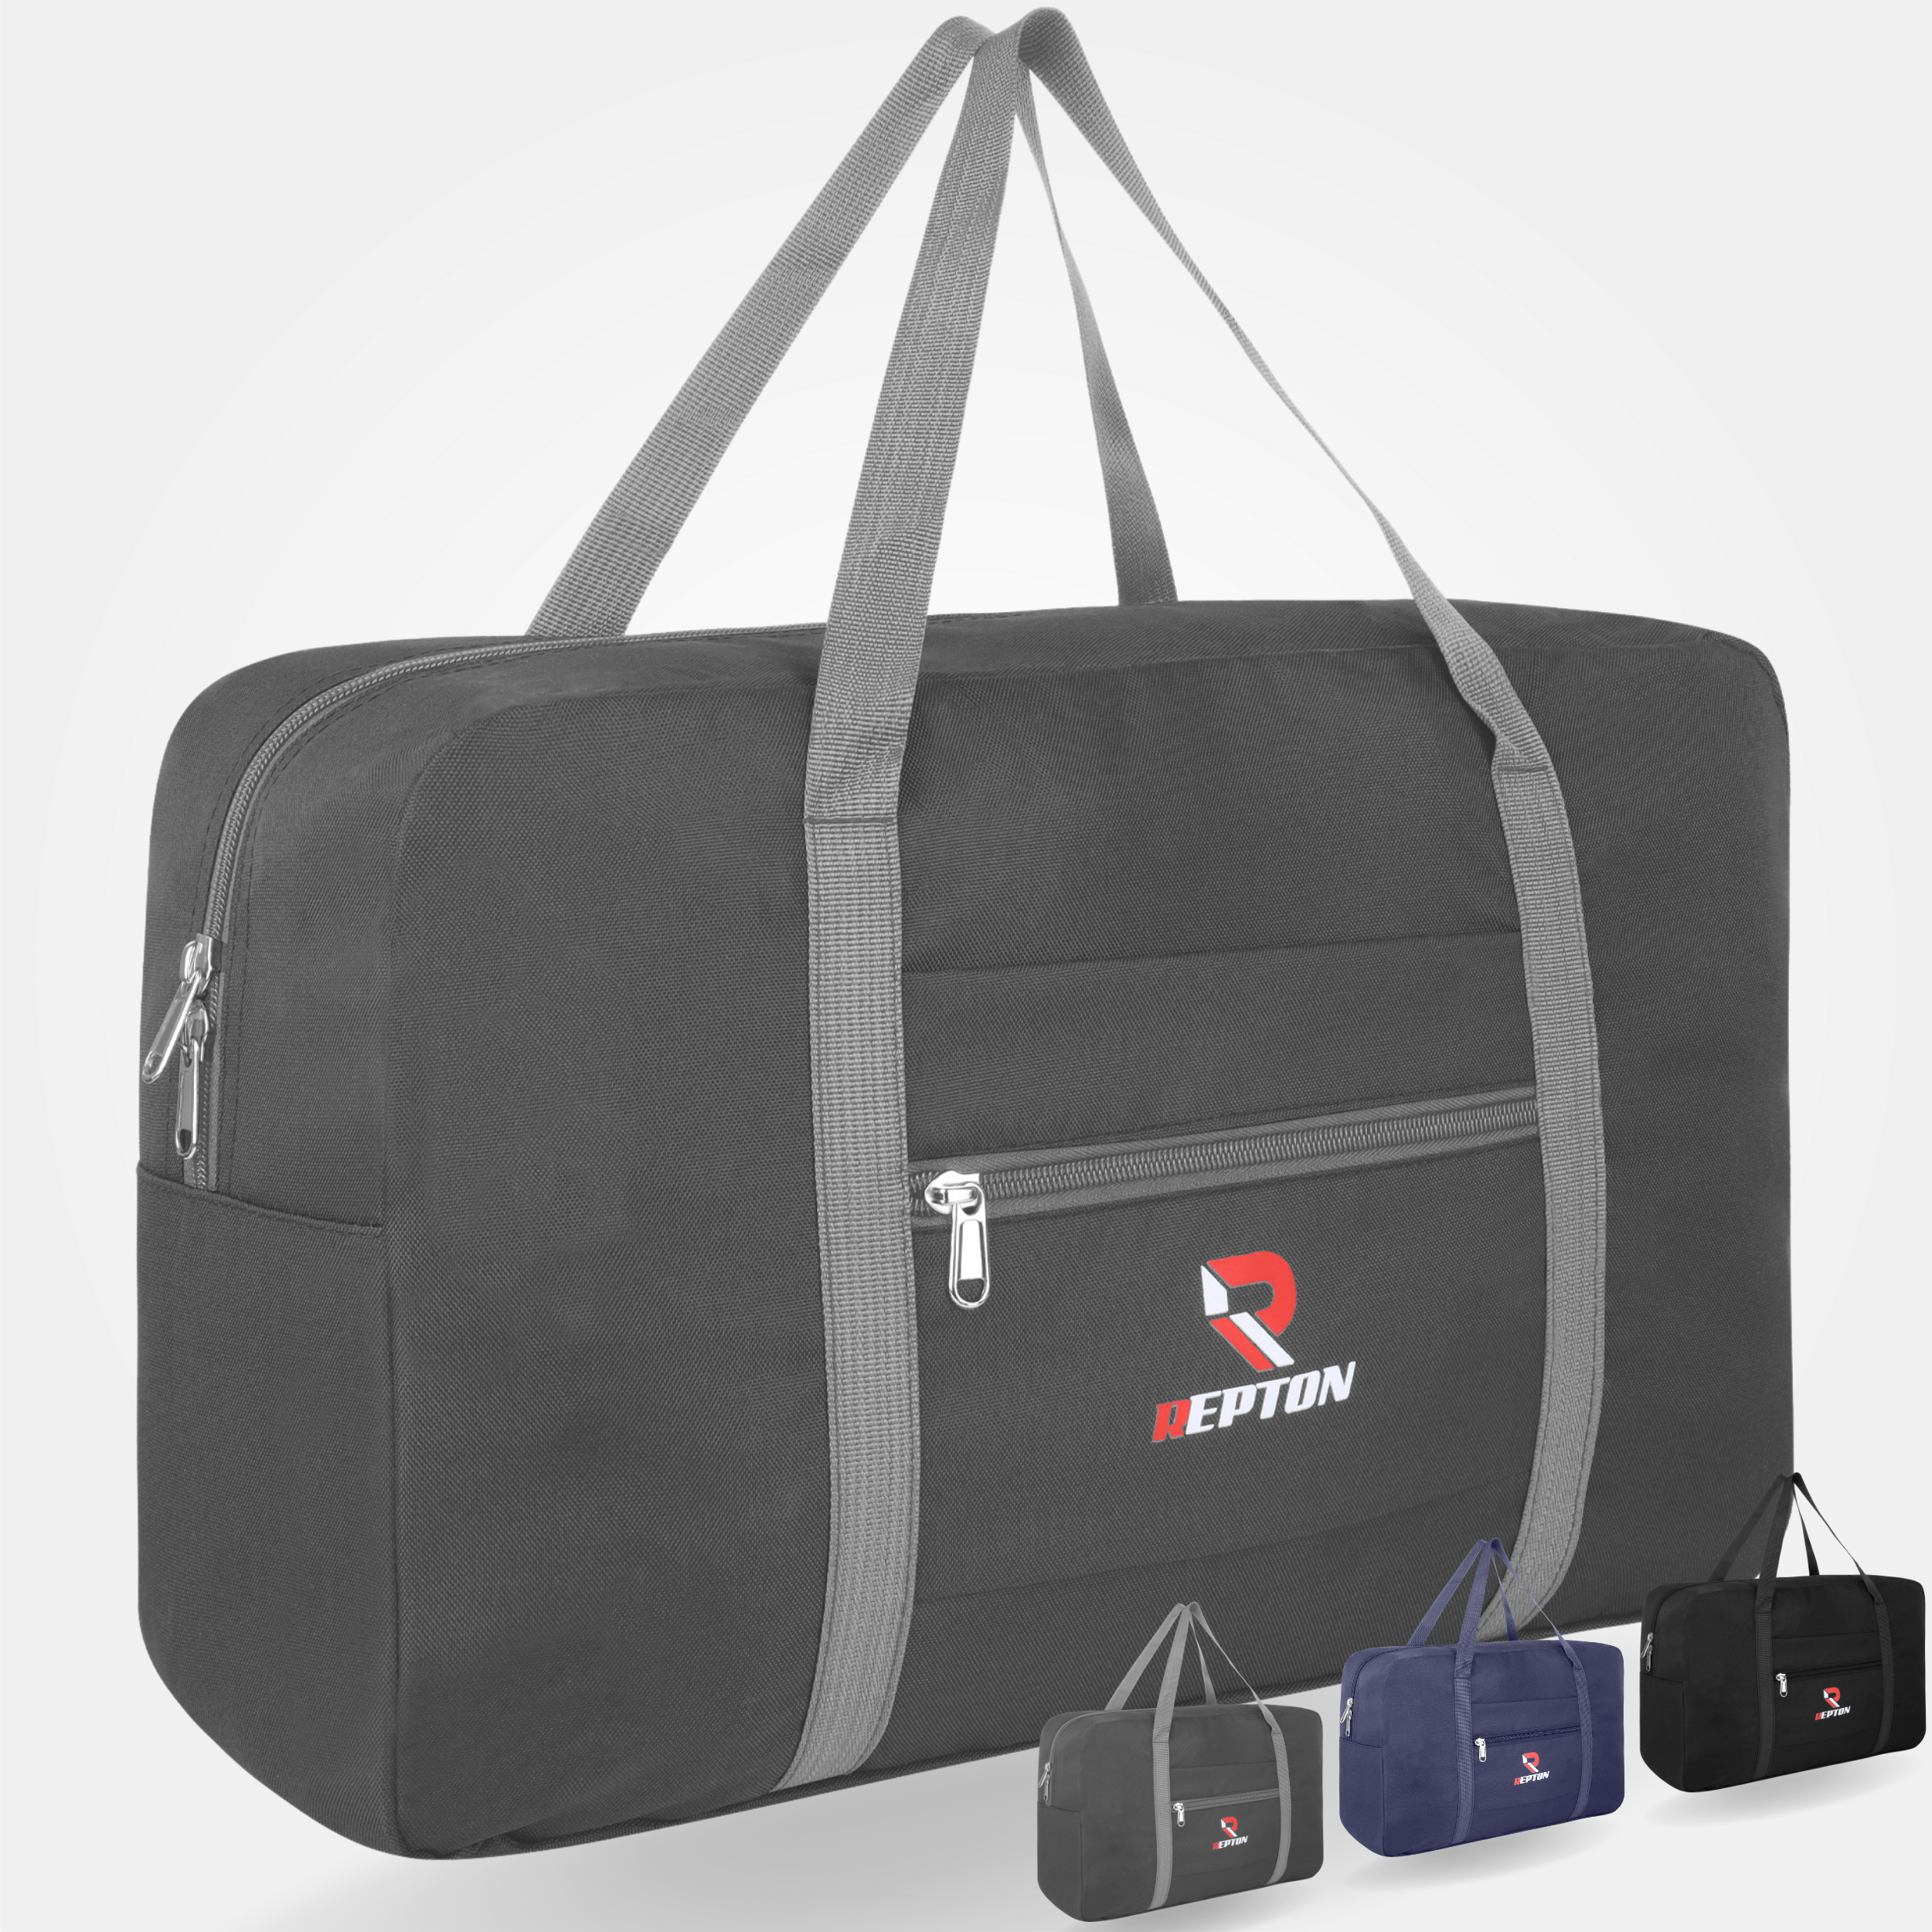 Carry on Hand Luggage Weekend Bag for Men & Women Repton Fitness and Boxing Gears